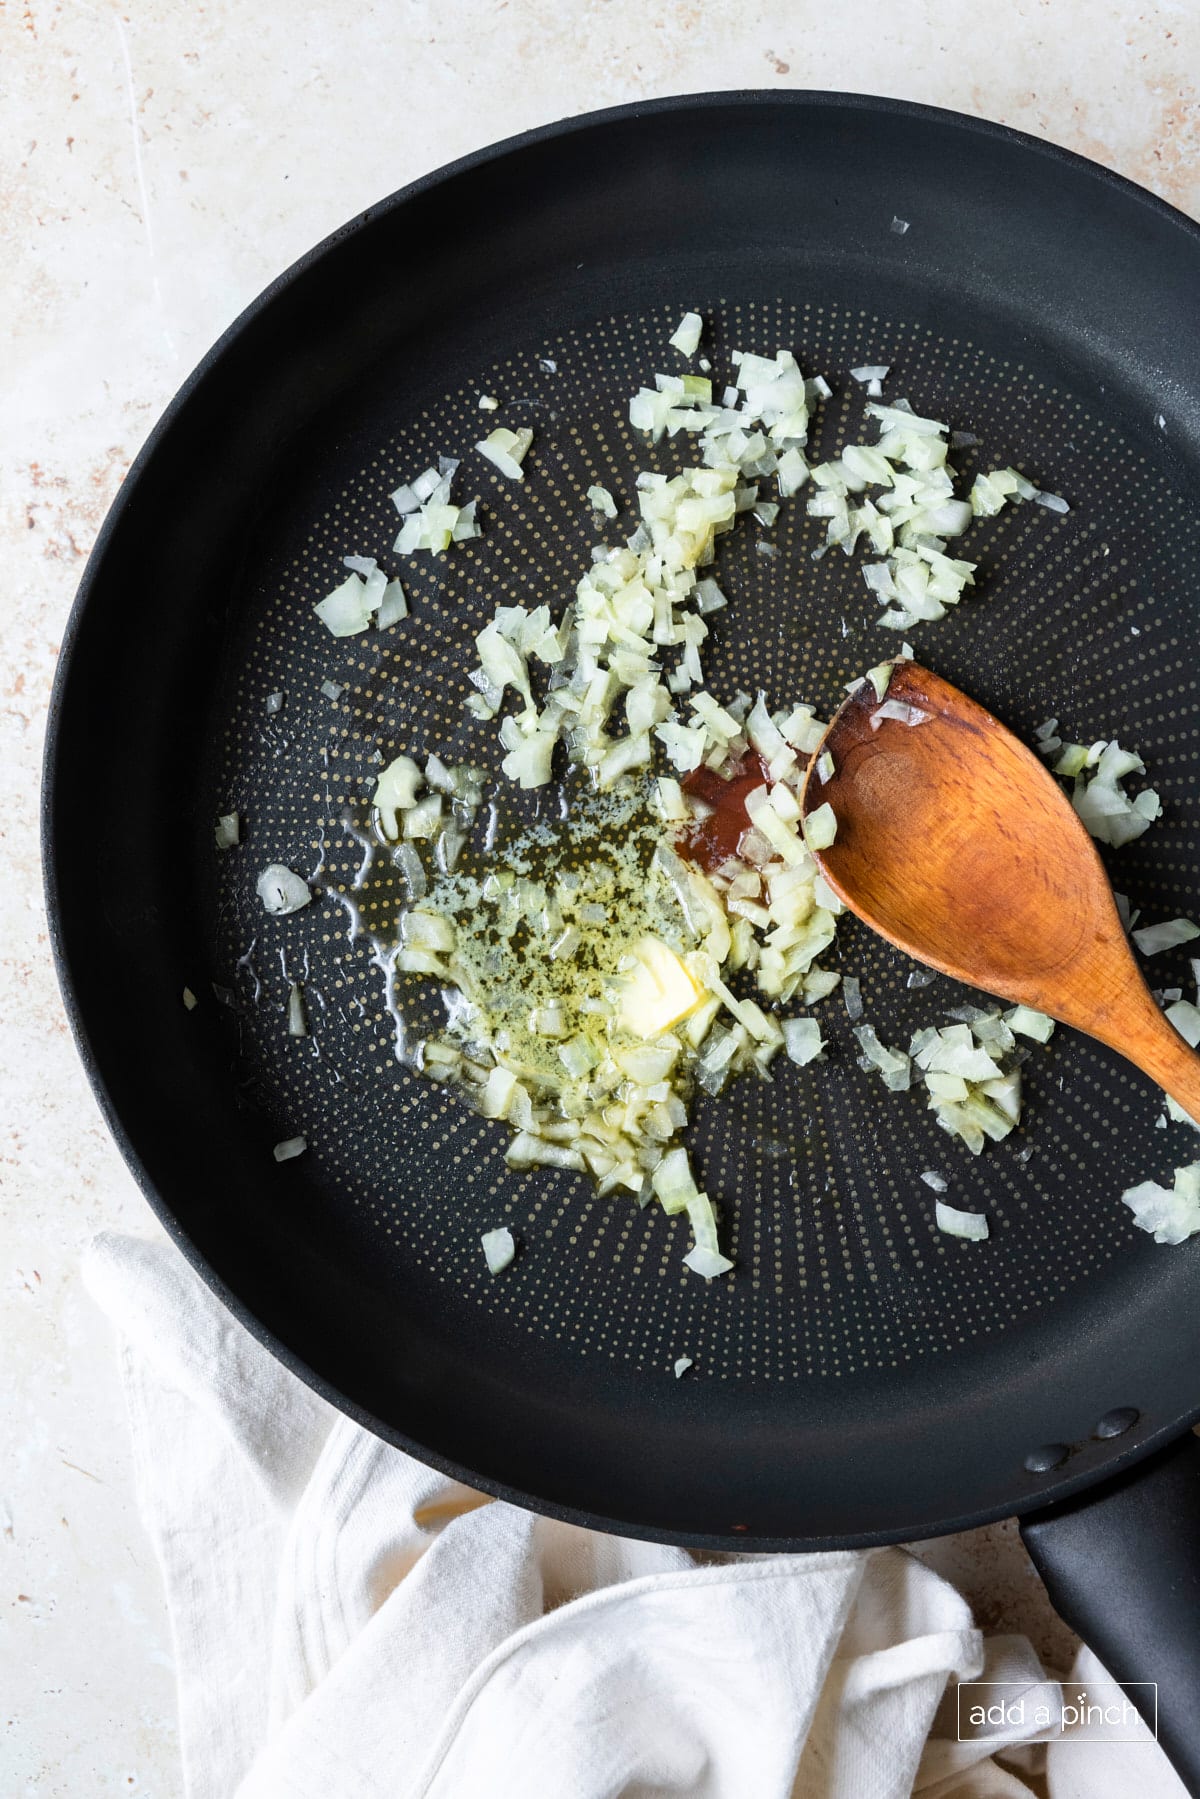 Garlic and onions sauteeing in a skillet with a wooden spoon.